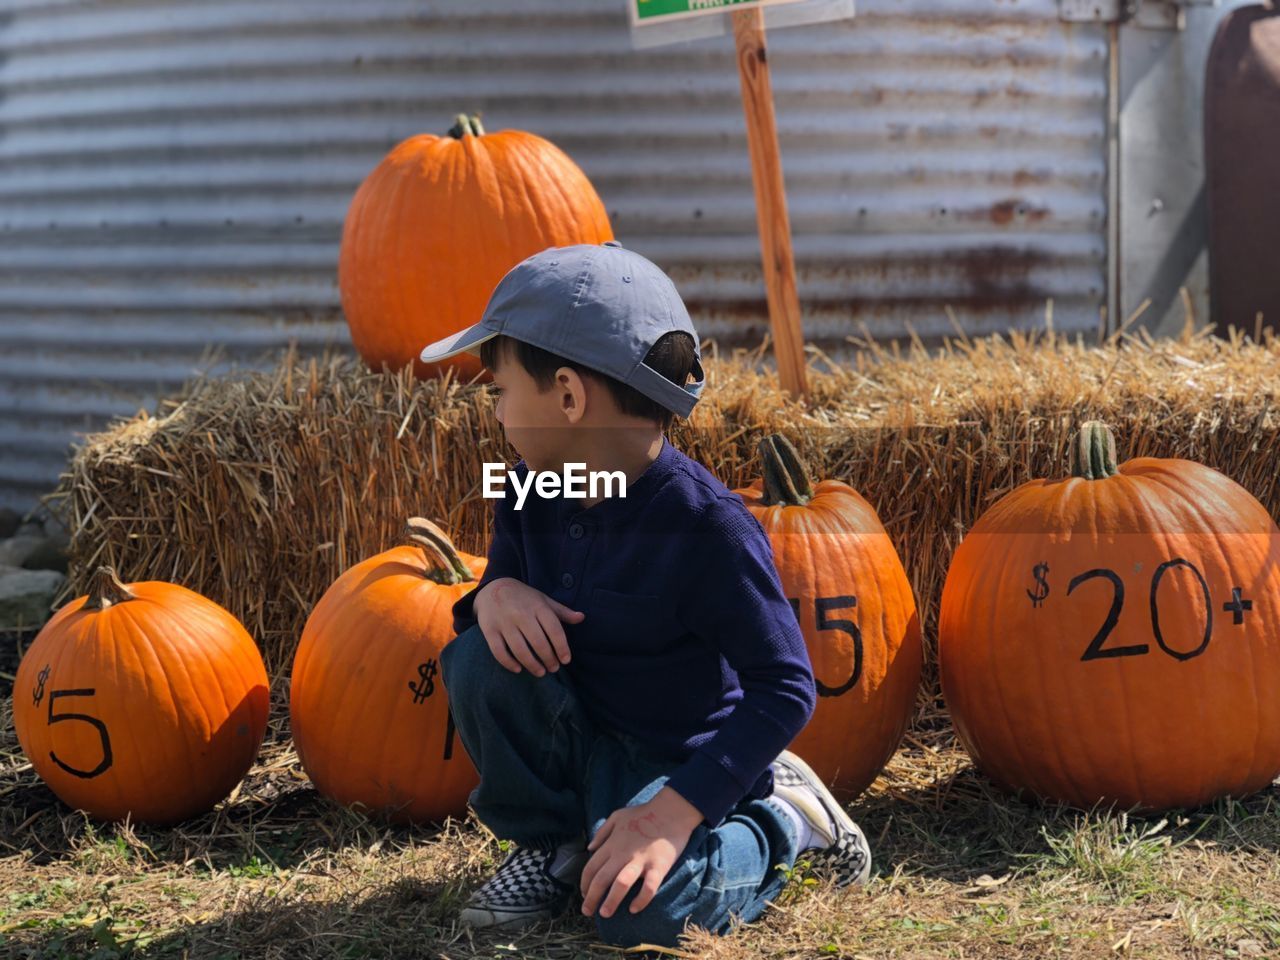 Boy looking at pumpkins for sale at farm